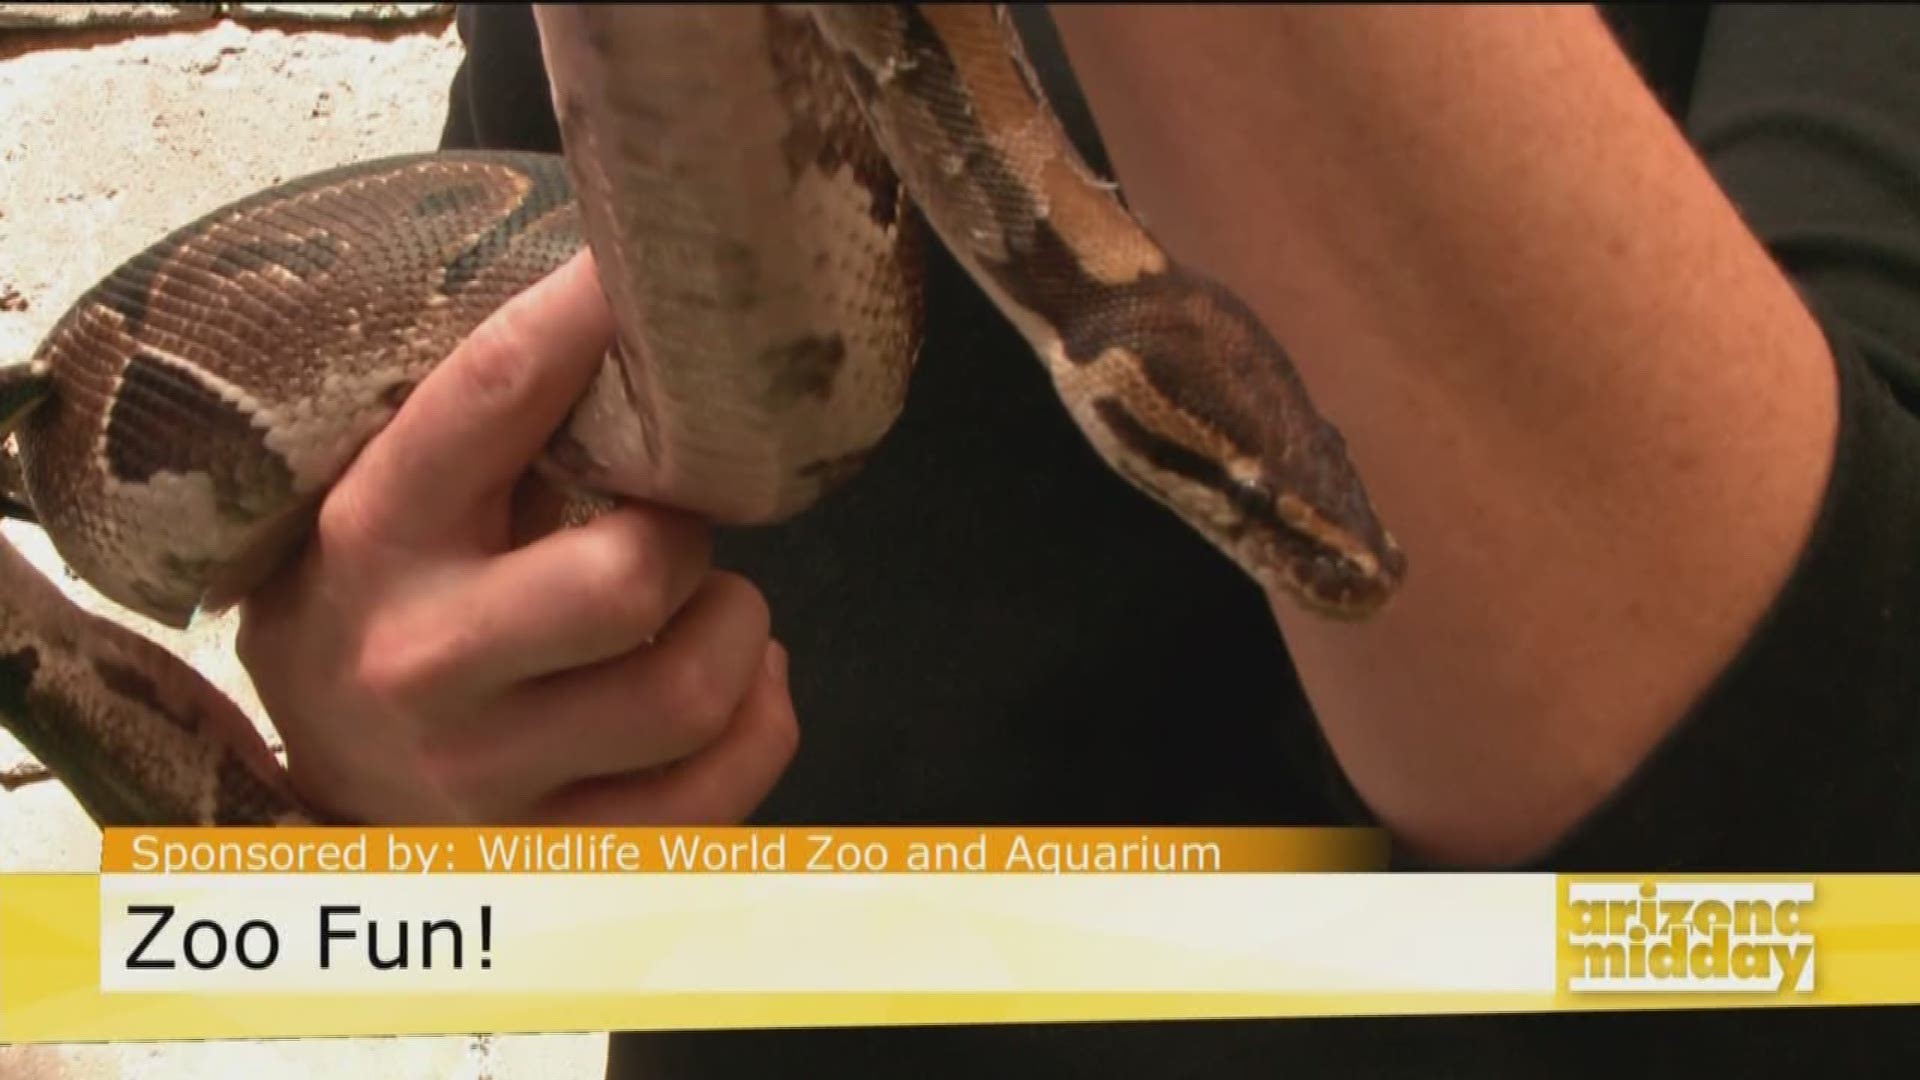 Kristy Morcom from the Wildlife World Zoo and Aquarium brought a python to visit today.